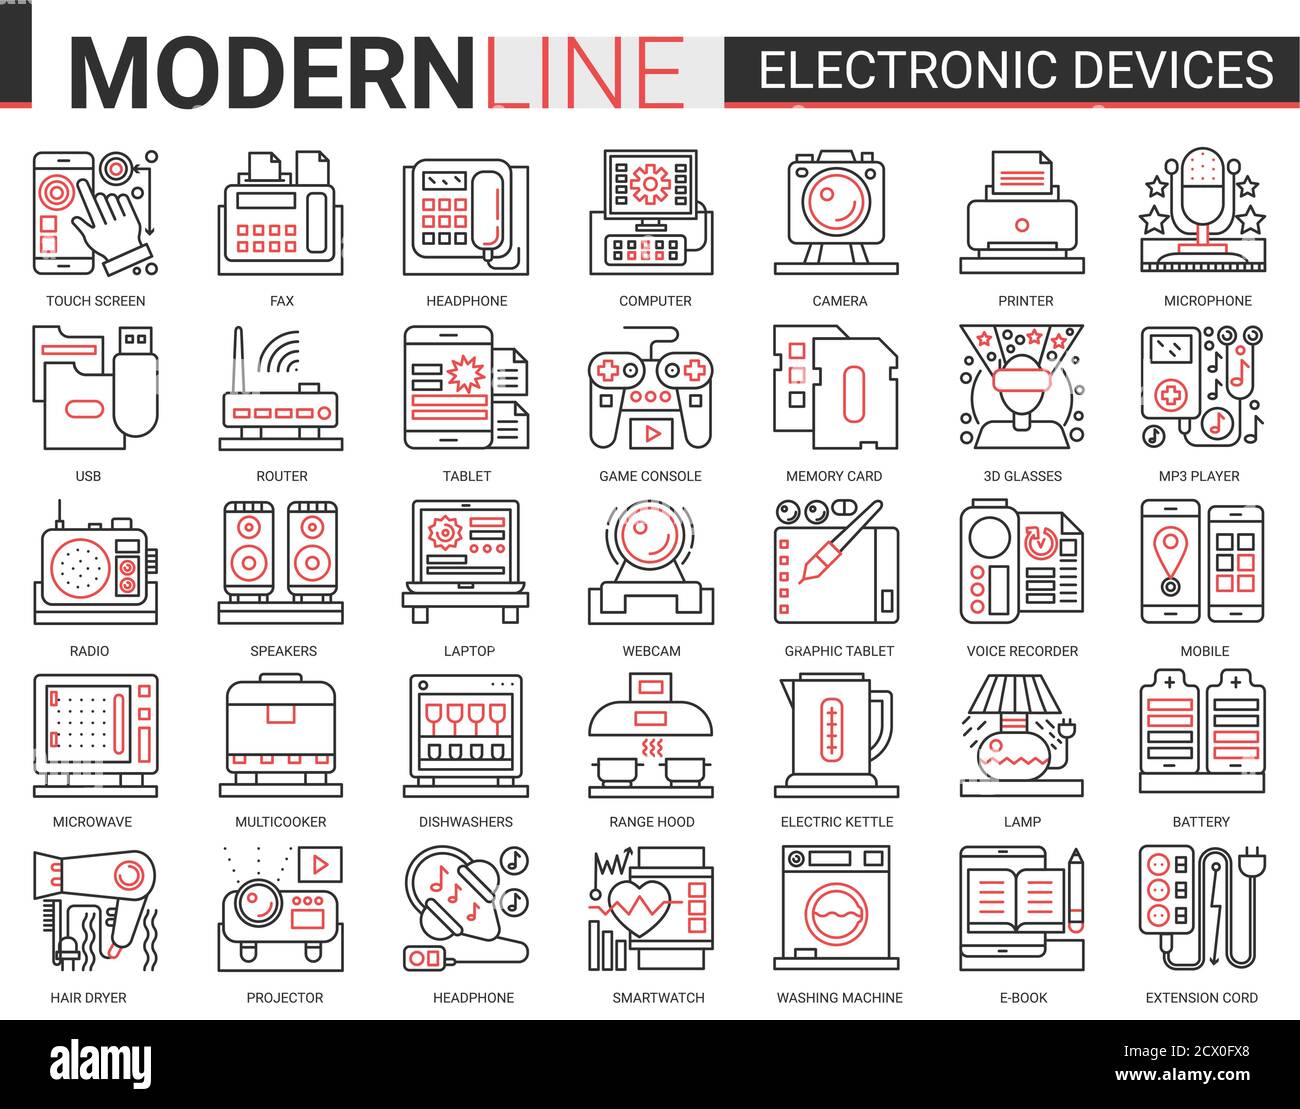 Electronic devices complex concept icon vector set. Red black thin line computer game accessories and kitchen appliances collection of outline electronically symbols for gadget or kitchenware store Stock Vector